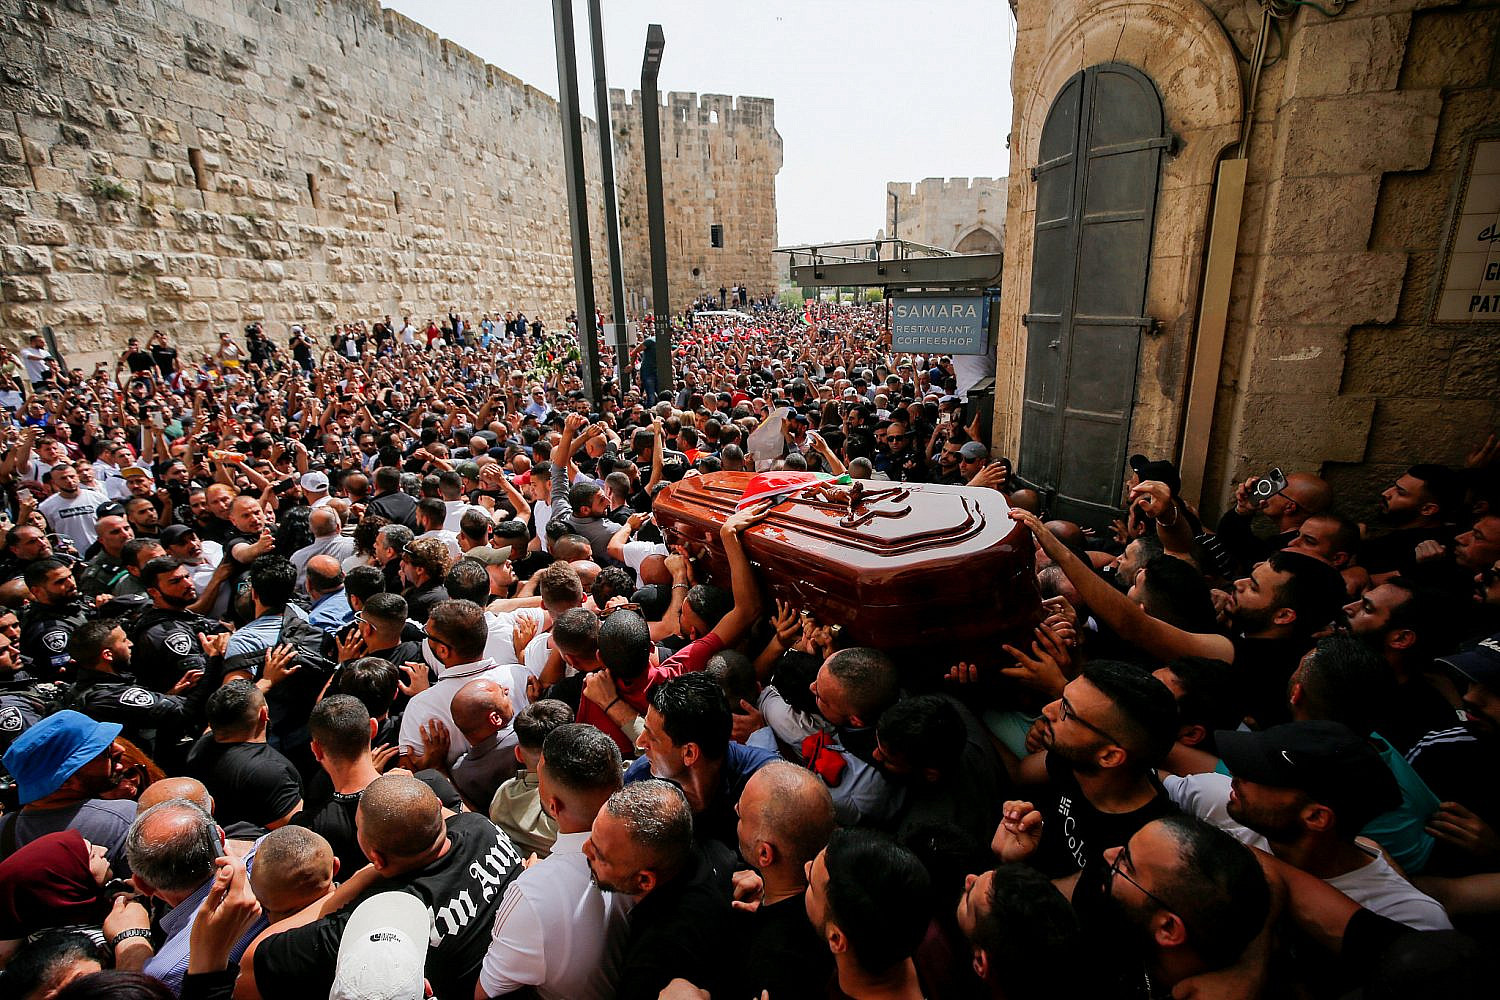 Mourners gather for the funeral procession of Al Jazeera journalist Shireen Abu Akleh in Jerusalem's Old City, May 13, 2022. (Jamal Awadl/Flash90)